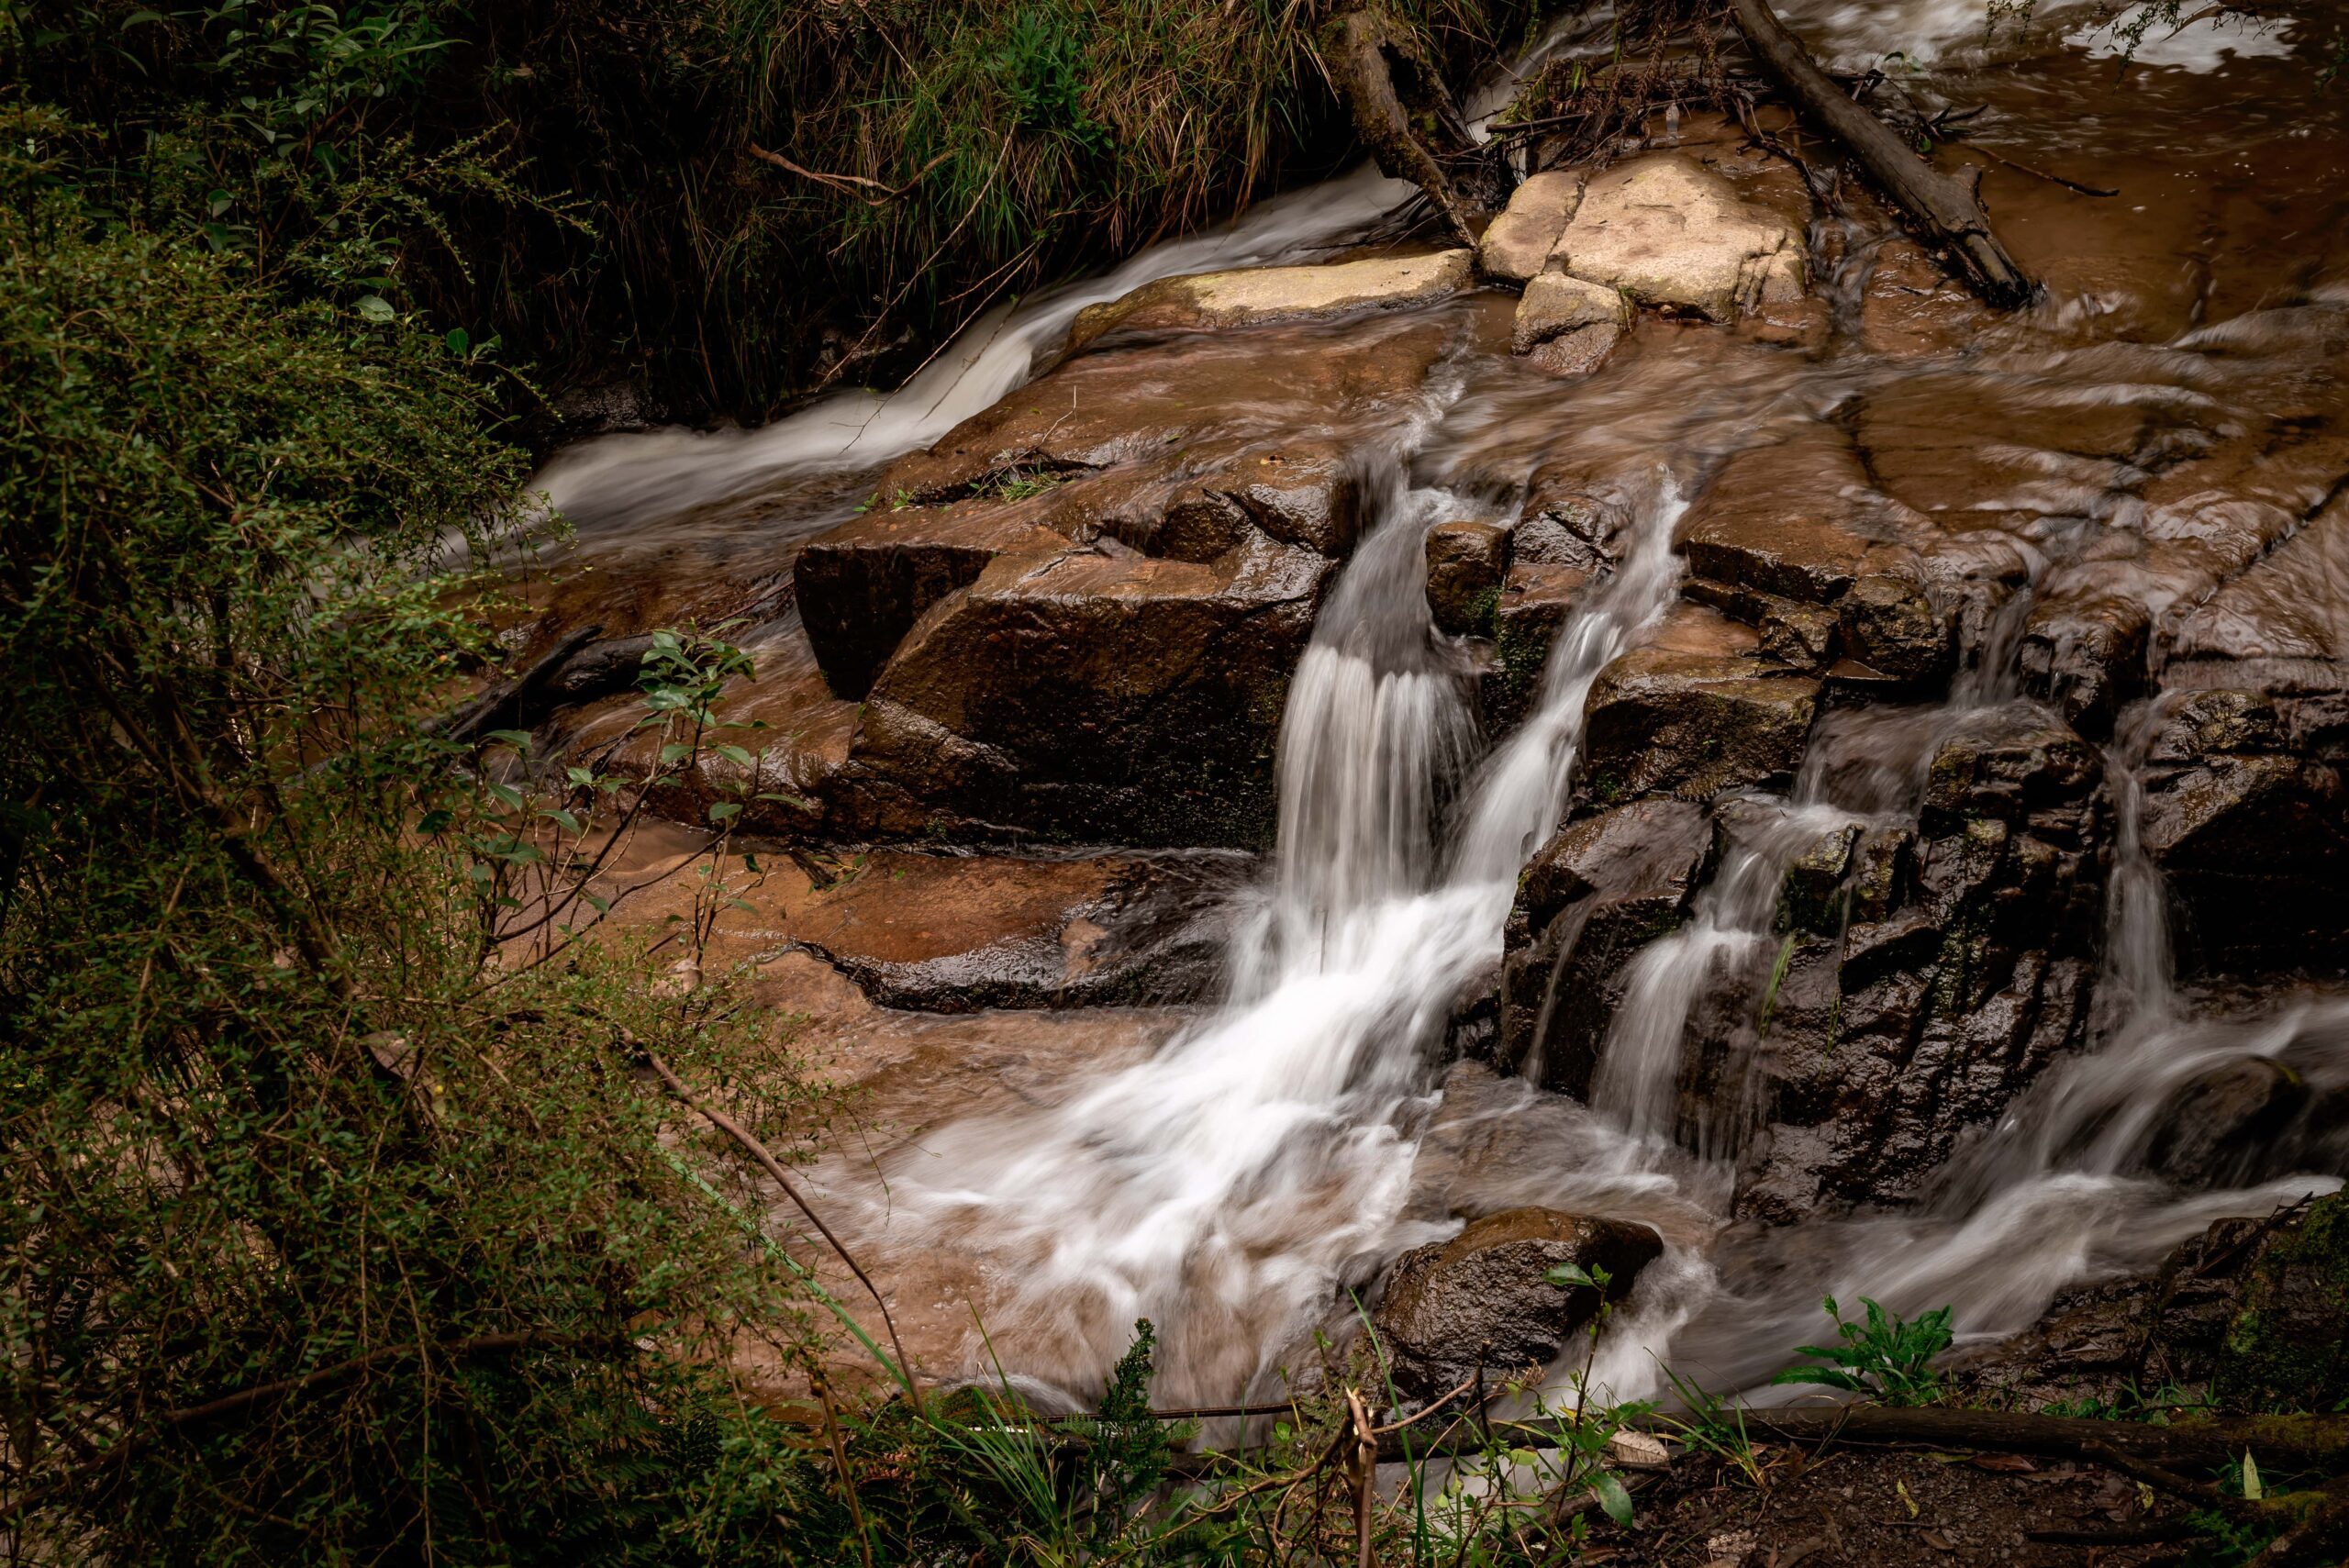 Olinda Falls Waterfall photographed with slow shutter speed